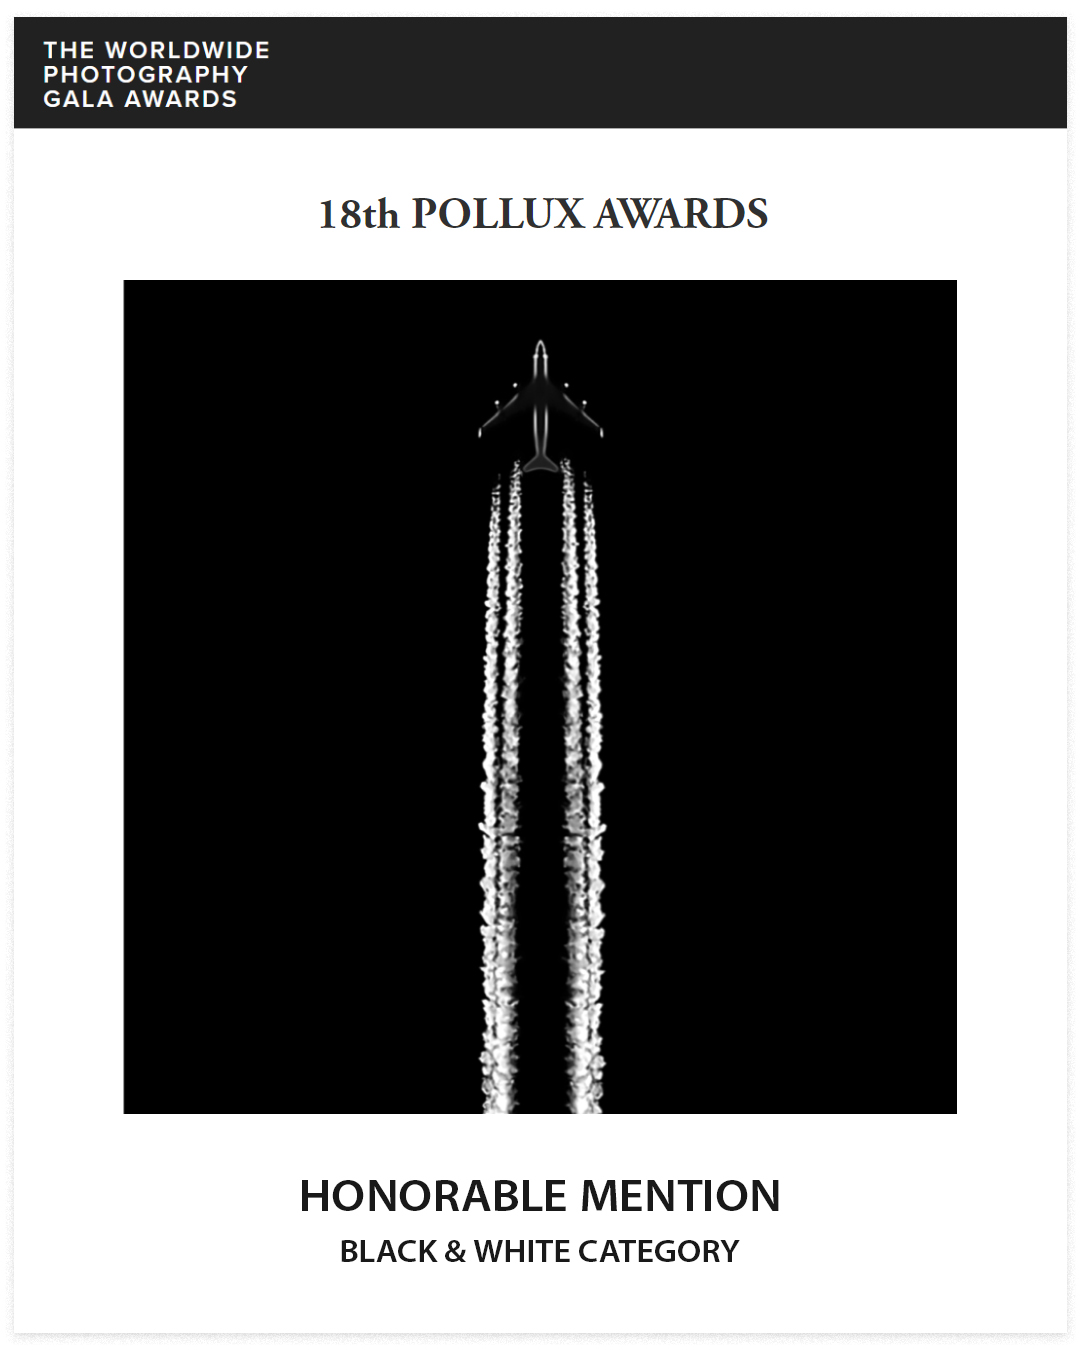 Optimistic, Honorable Mention in Black & White Category